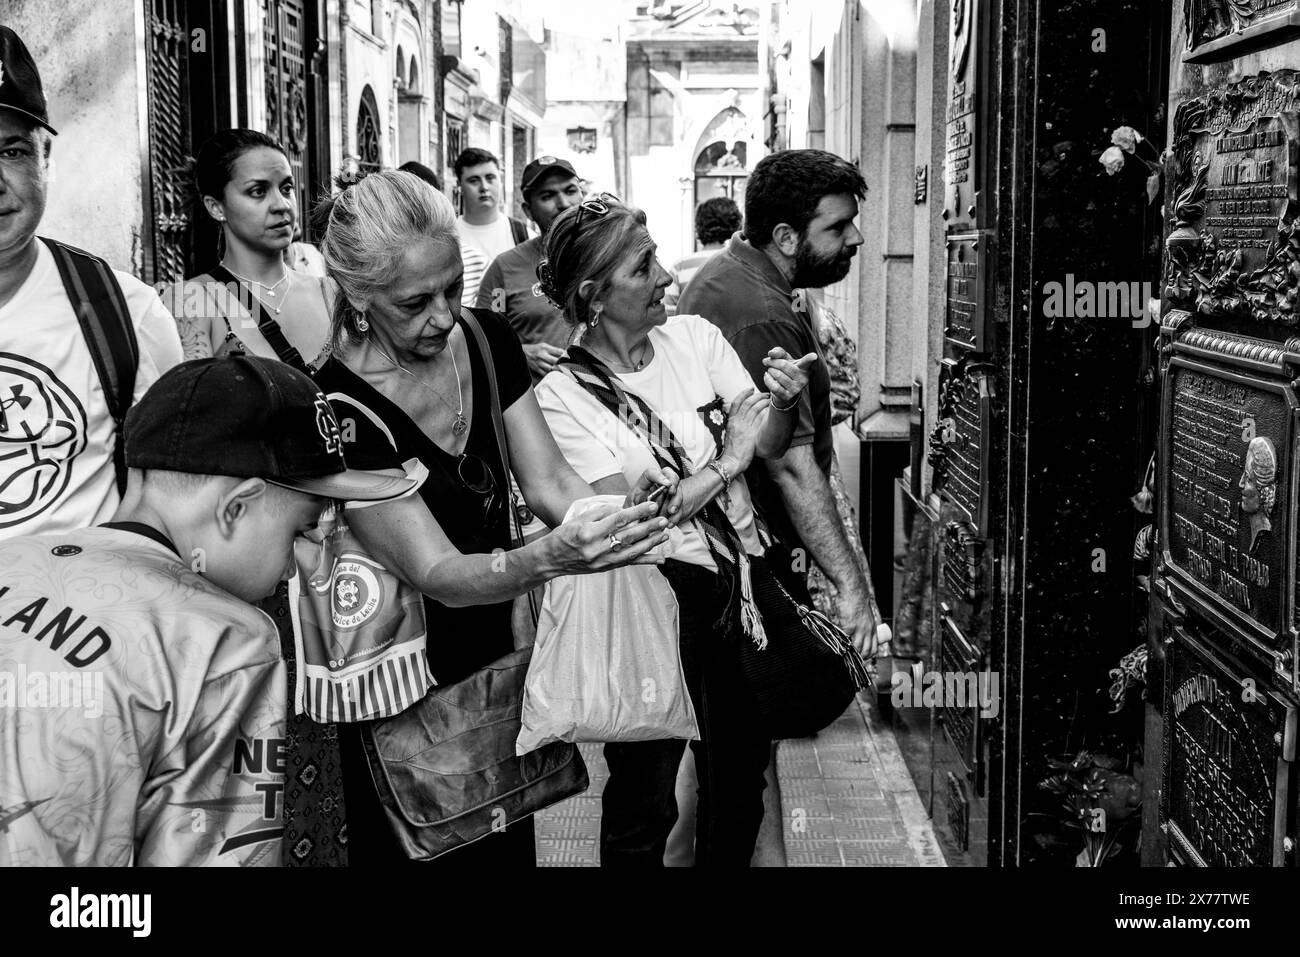 Visitors Gather At The Tomb of Eva Peron (also known as Evita), The Recoleta Cemetery, Buenos Aires, Argentina. Stock Photo